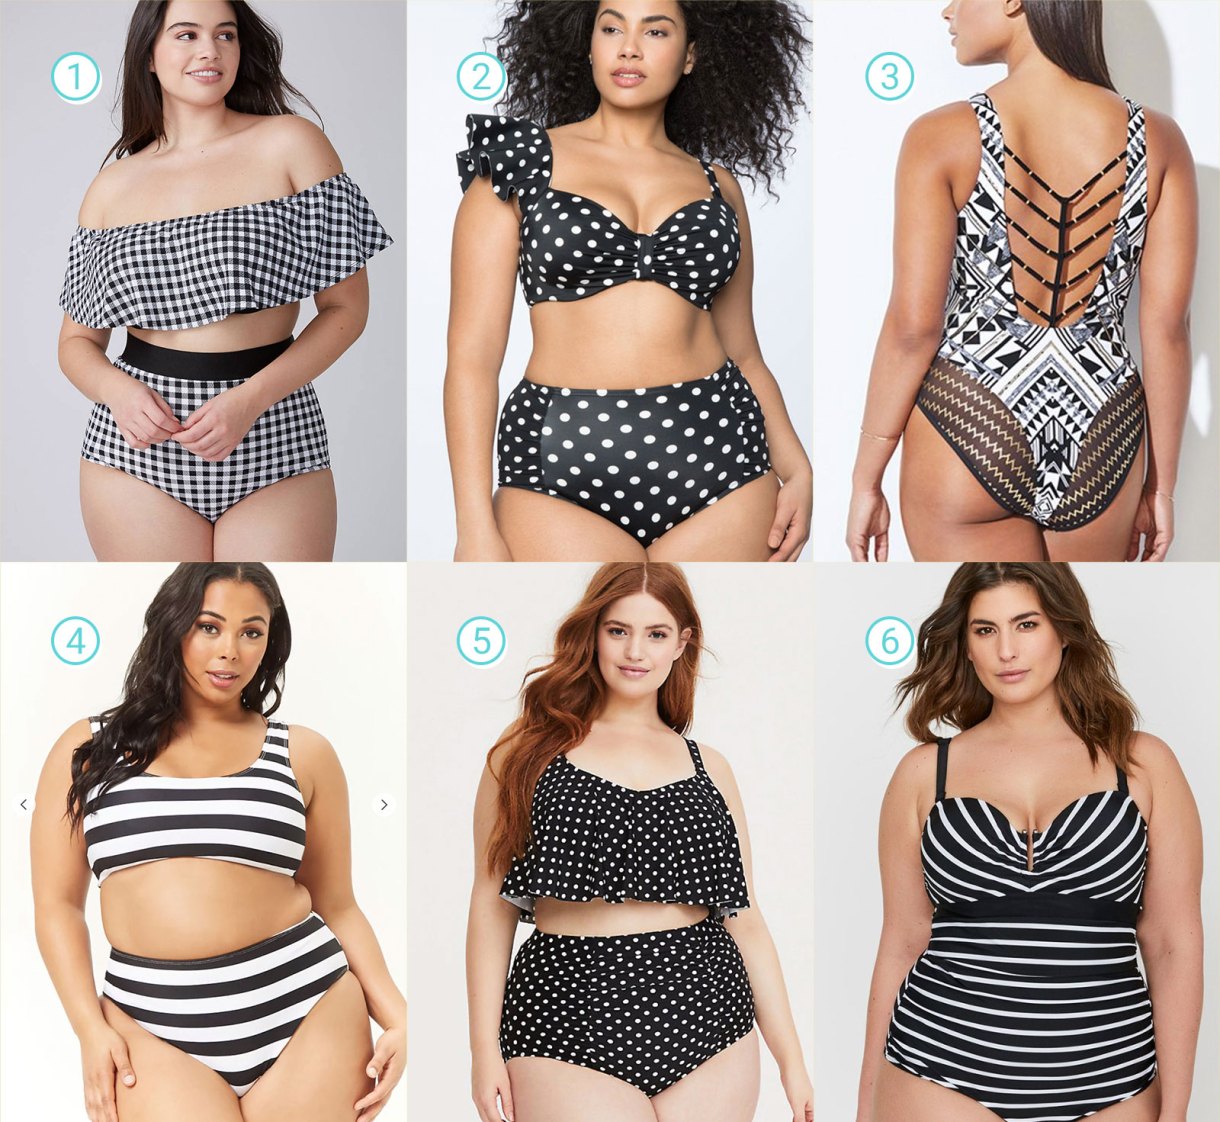 ModCloth's New Swim Campaign Is Feminist AF